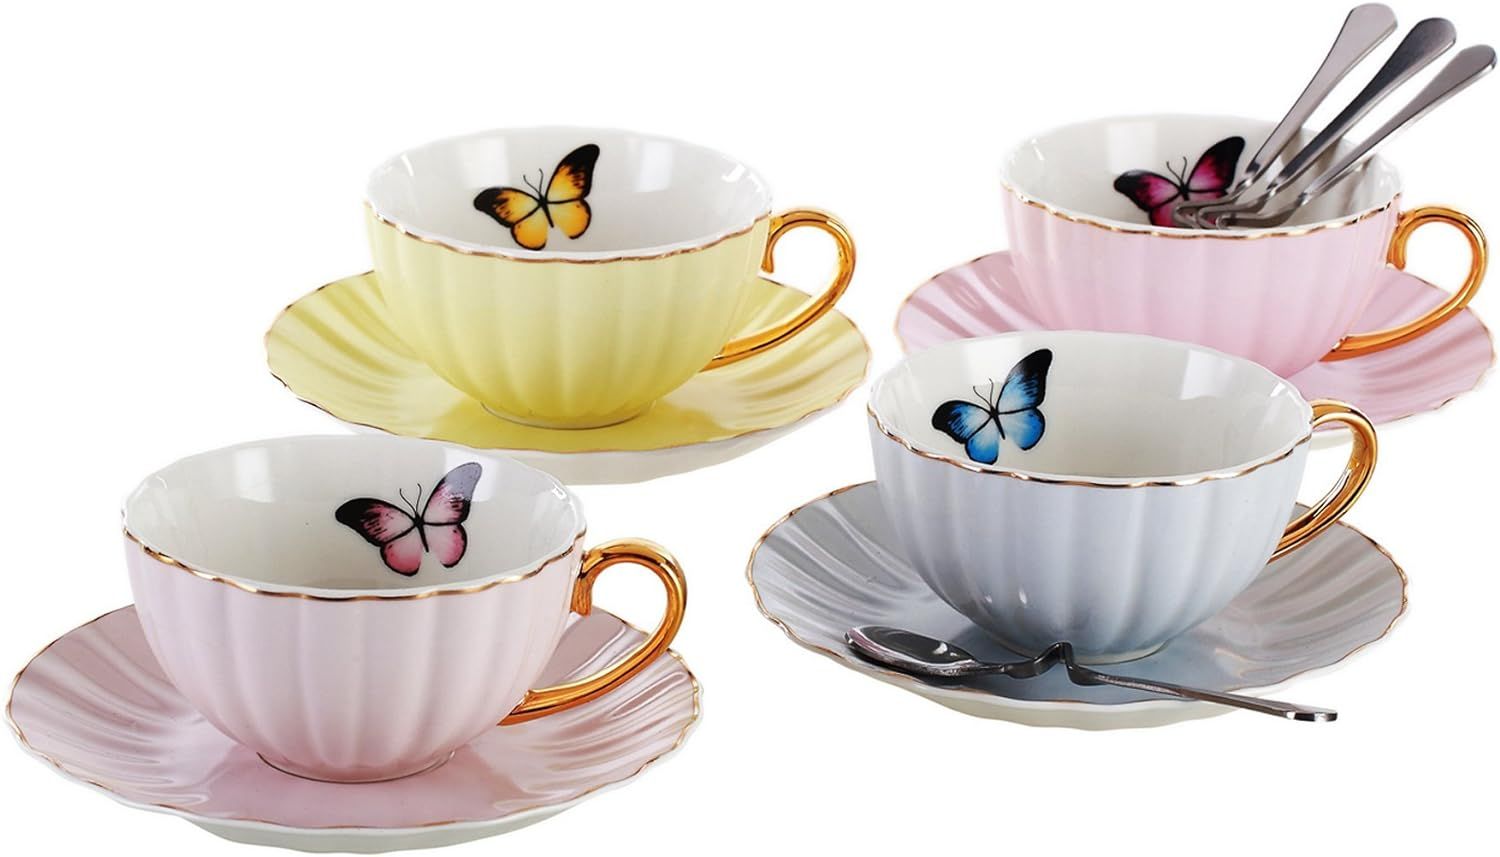 Jusalpha® Elegant Tea Cup and Saucer Set-Coffee Cup Set with Saucer and Spoon FD-TCS03-4COLOR | Amazon (US)